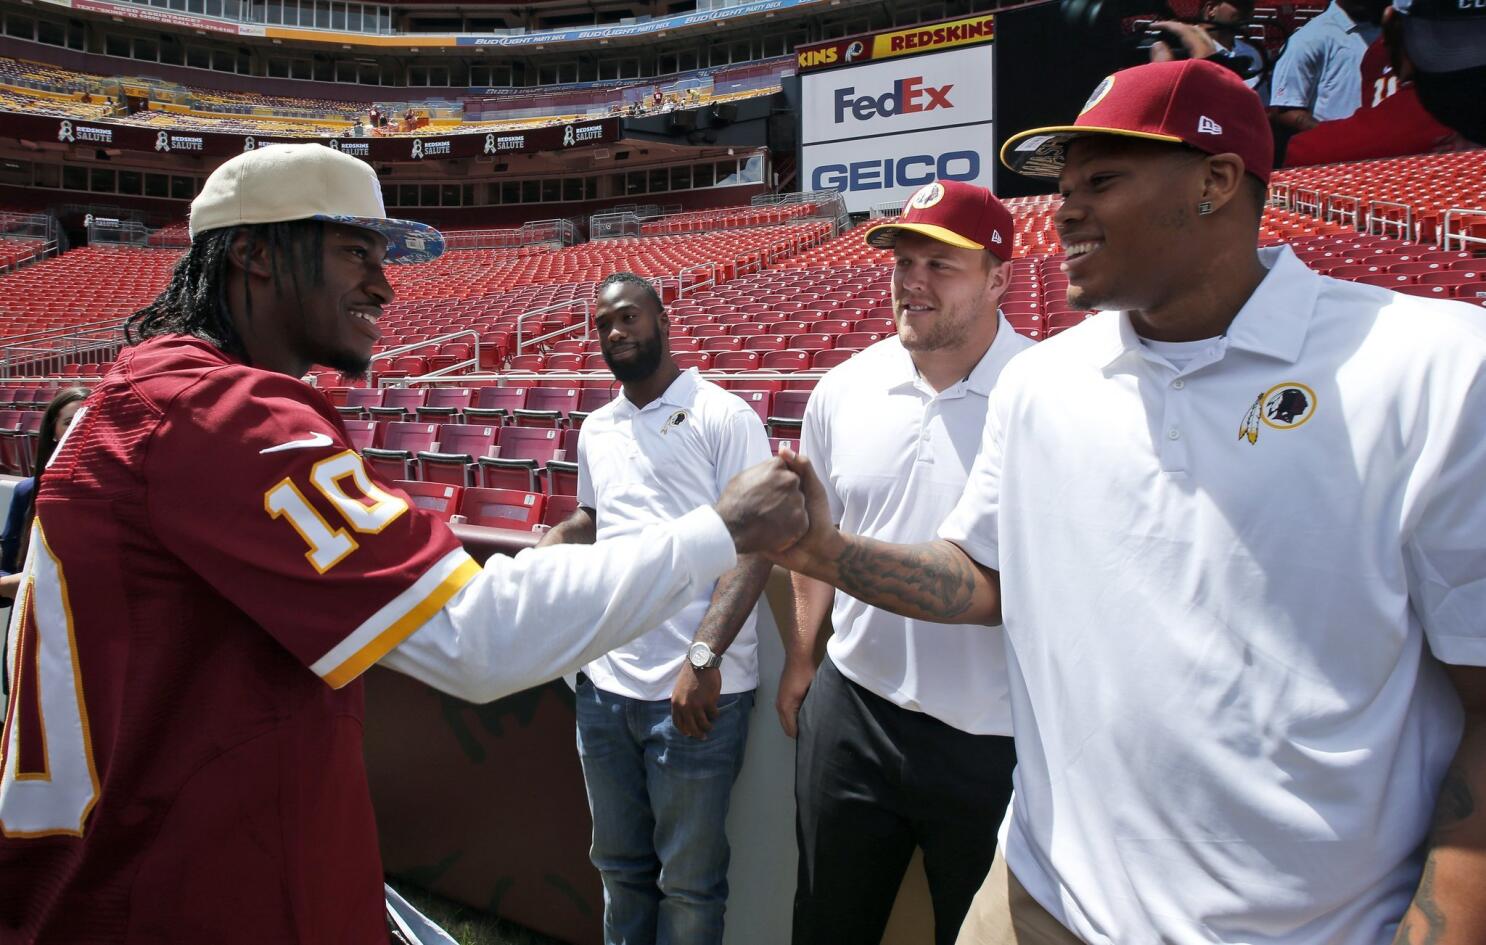 Washington Redskins continue to reduce seating capacity at FedEx